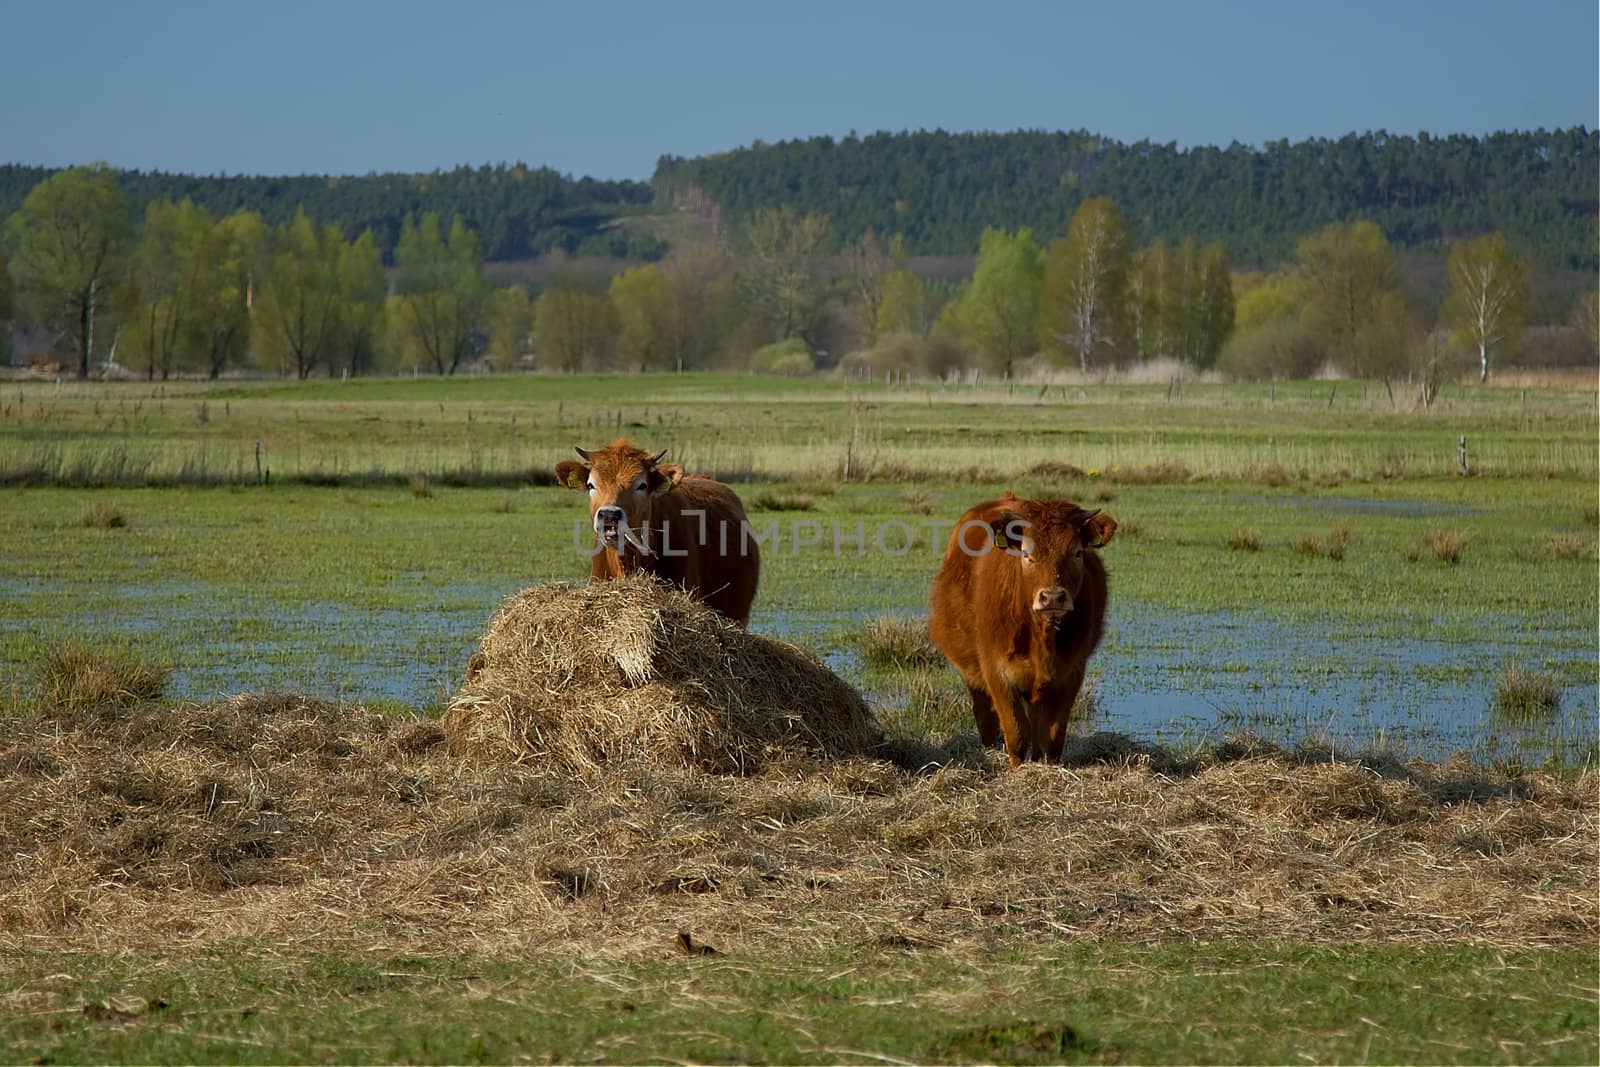 Cows in a pasture. Poland, Lubuskie.